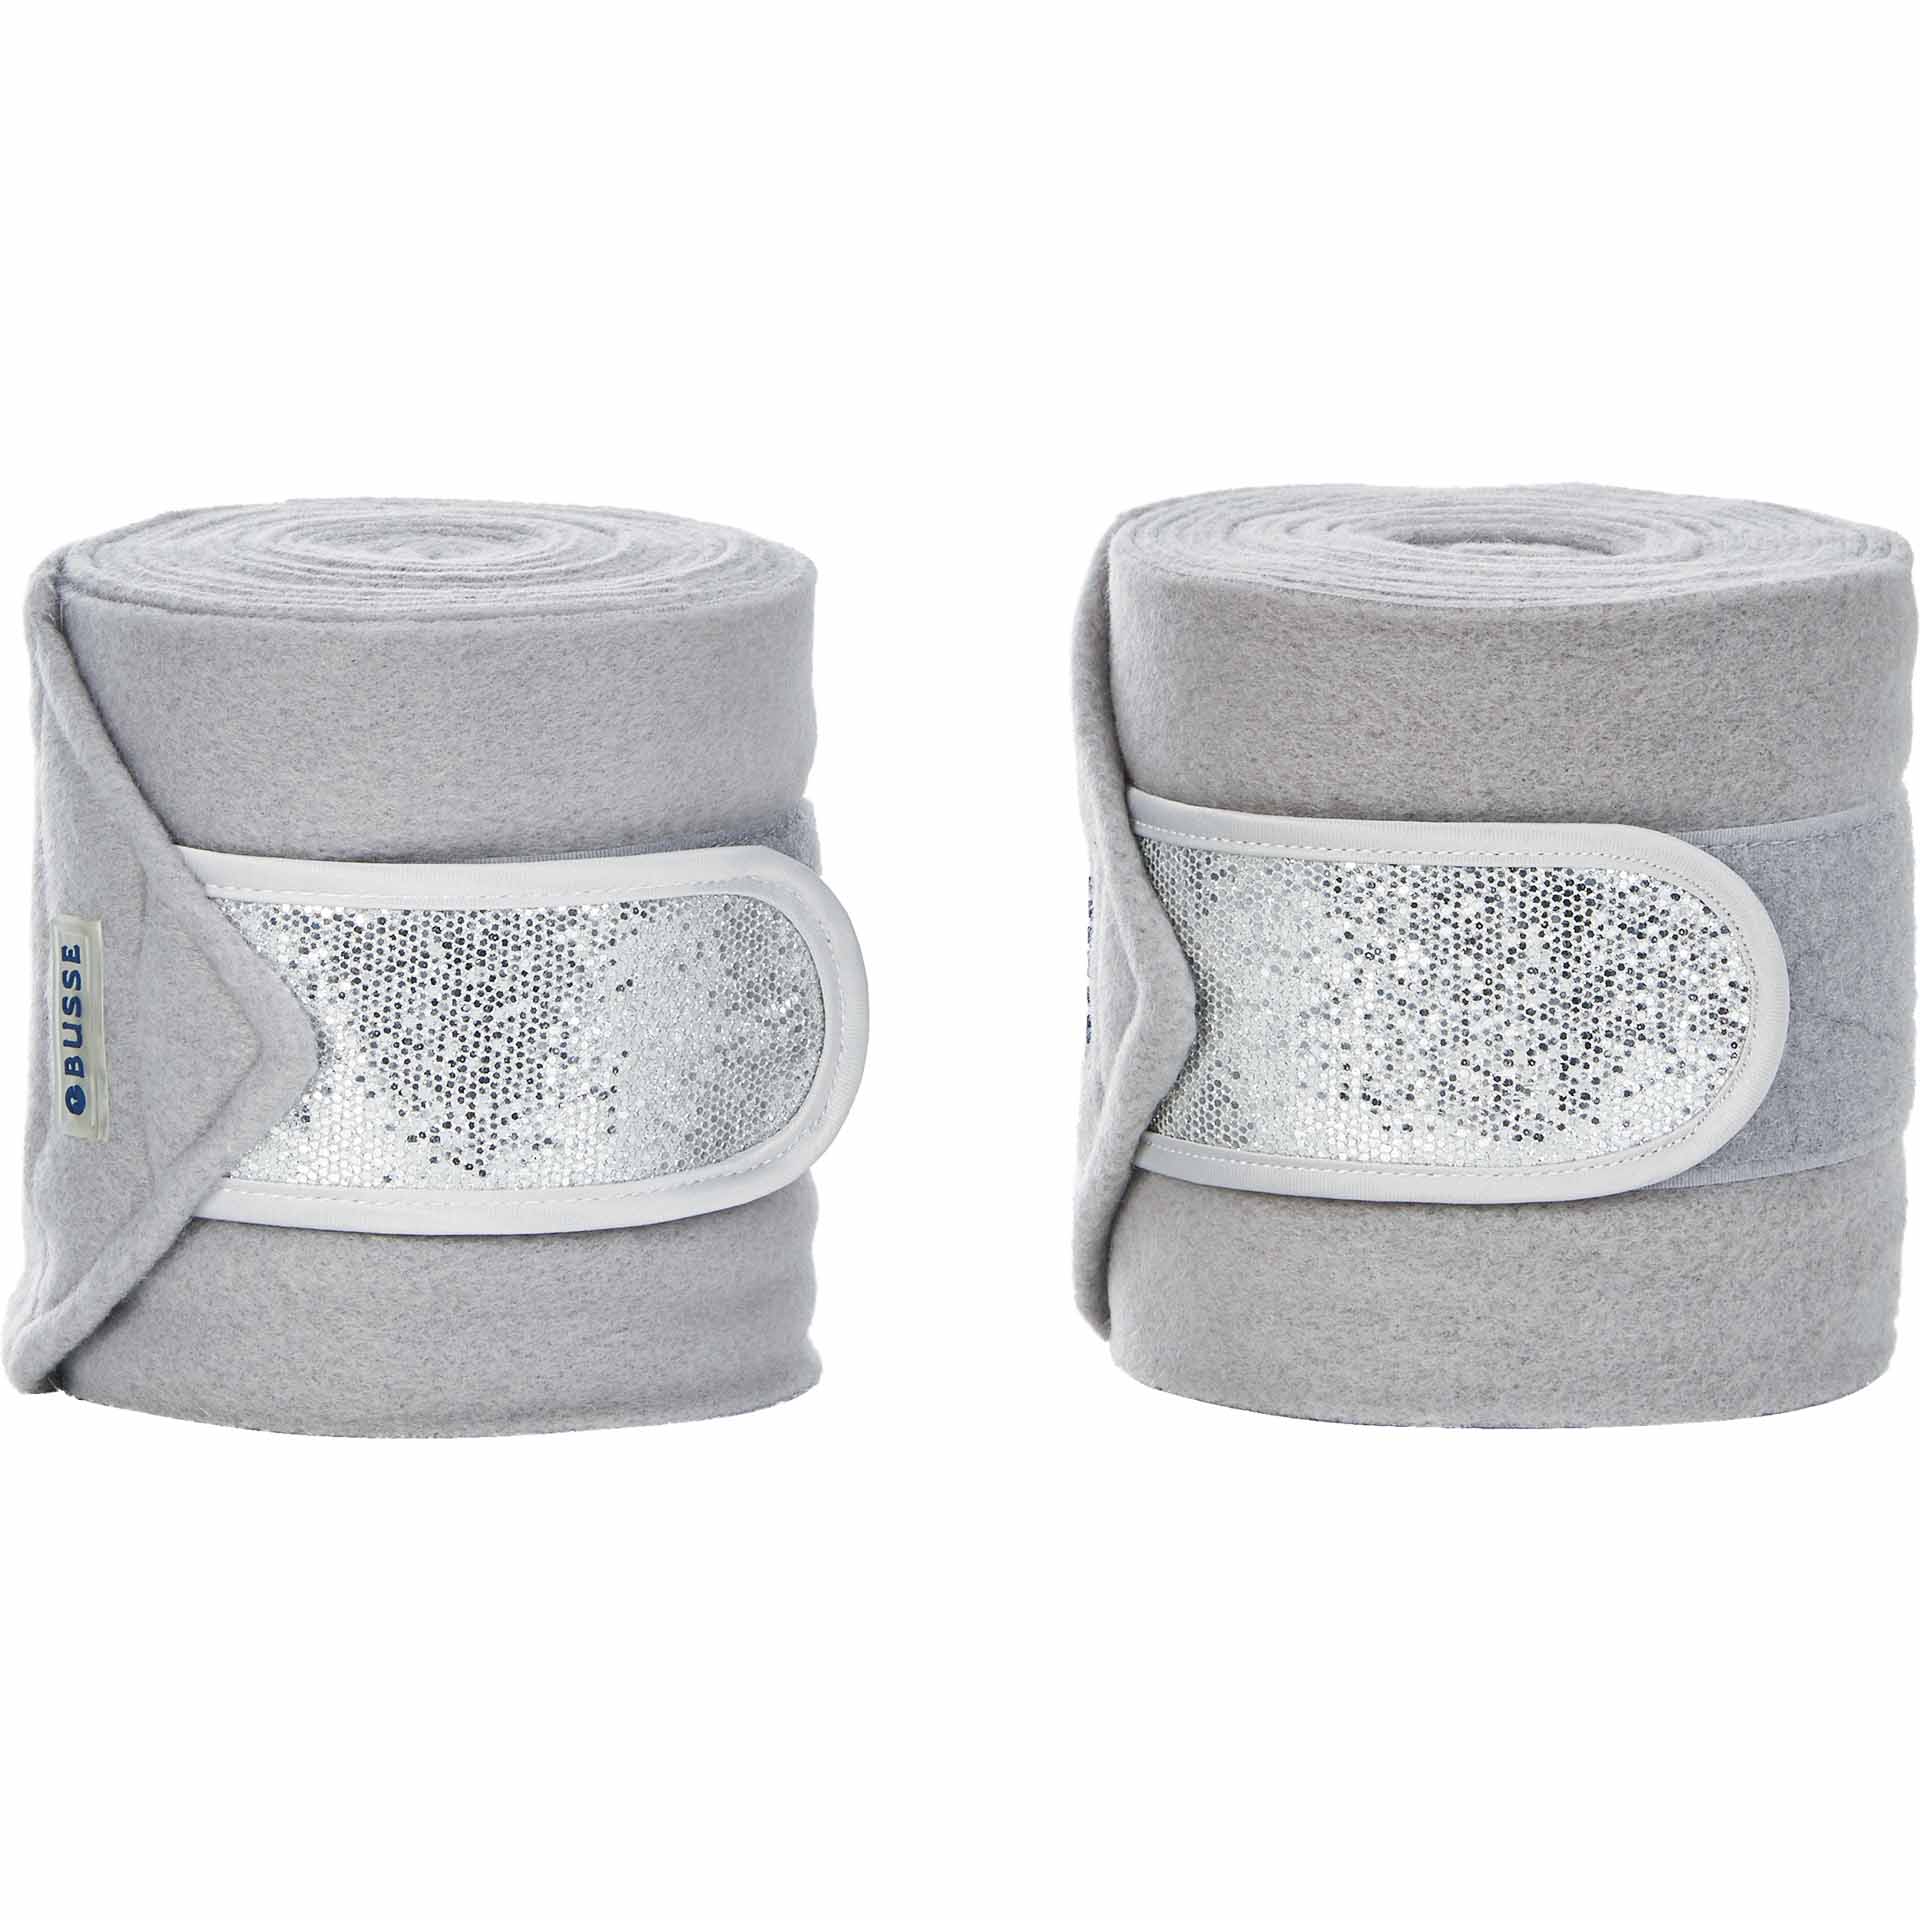 BUSSE Bandages CLASSIC GLITTER 350x12 gray/silver